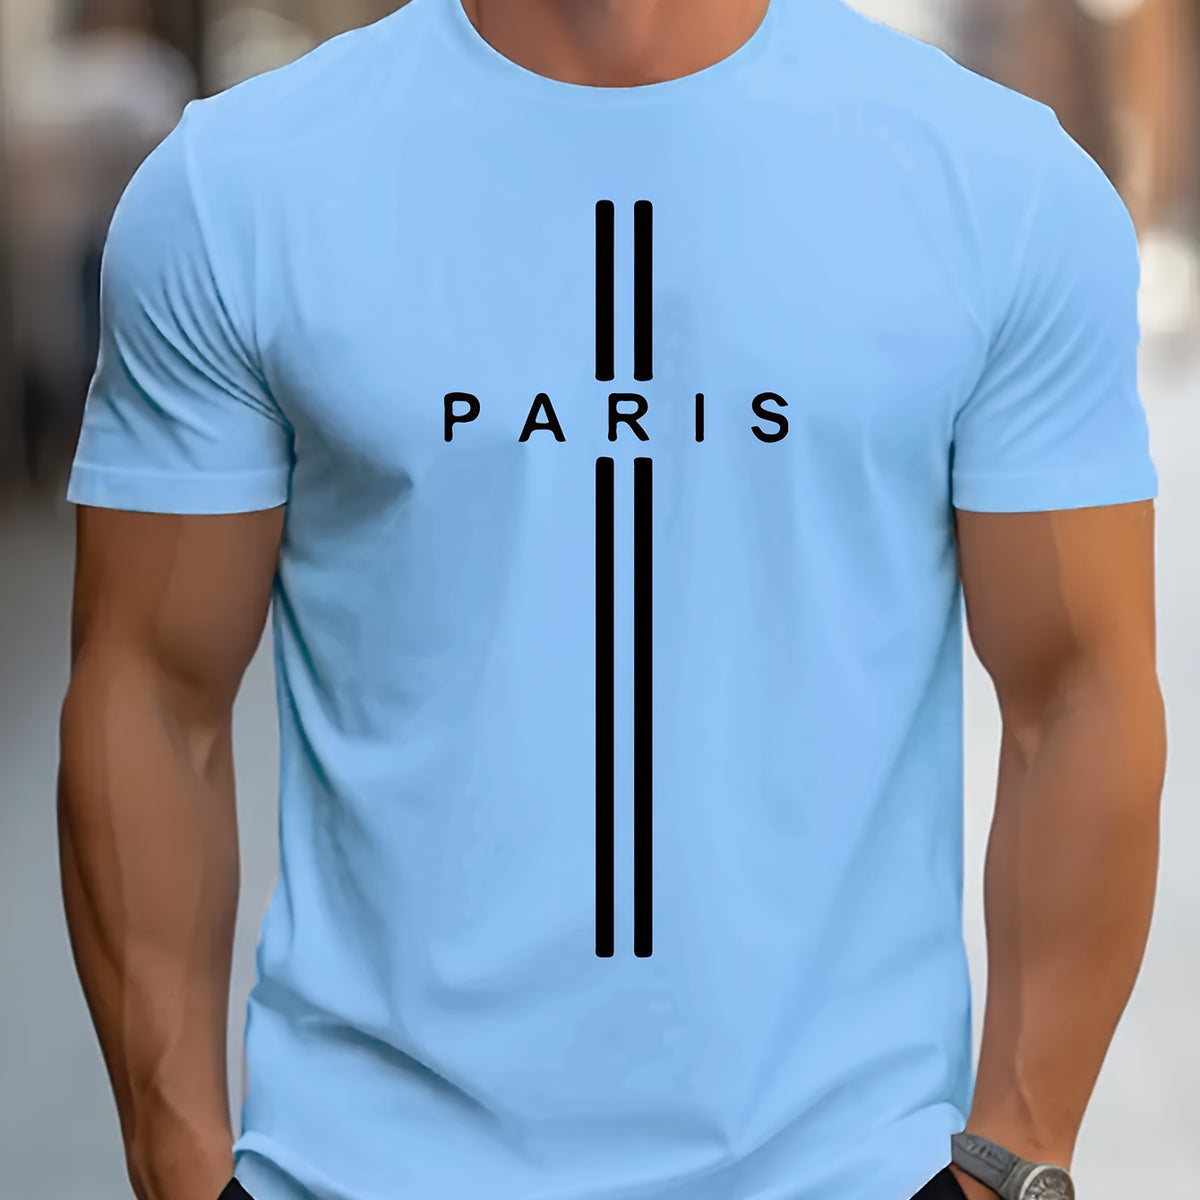 Paris Print, Men's Graphic Design Crew Neck T-shirt, Casual Comfy Tees Tshirts For Summer, Men's Clothing Tops For Daily Vacation Resorts